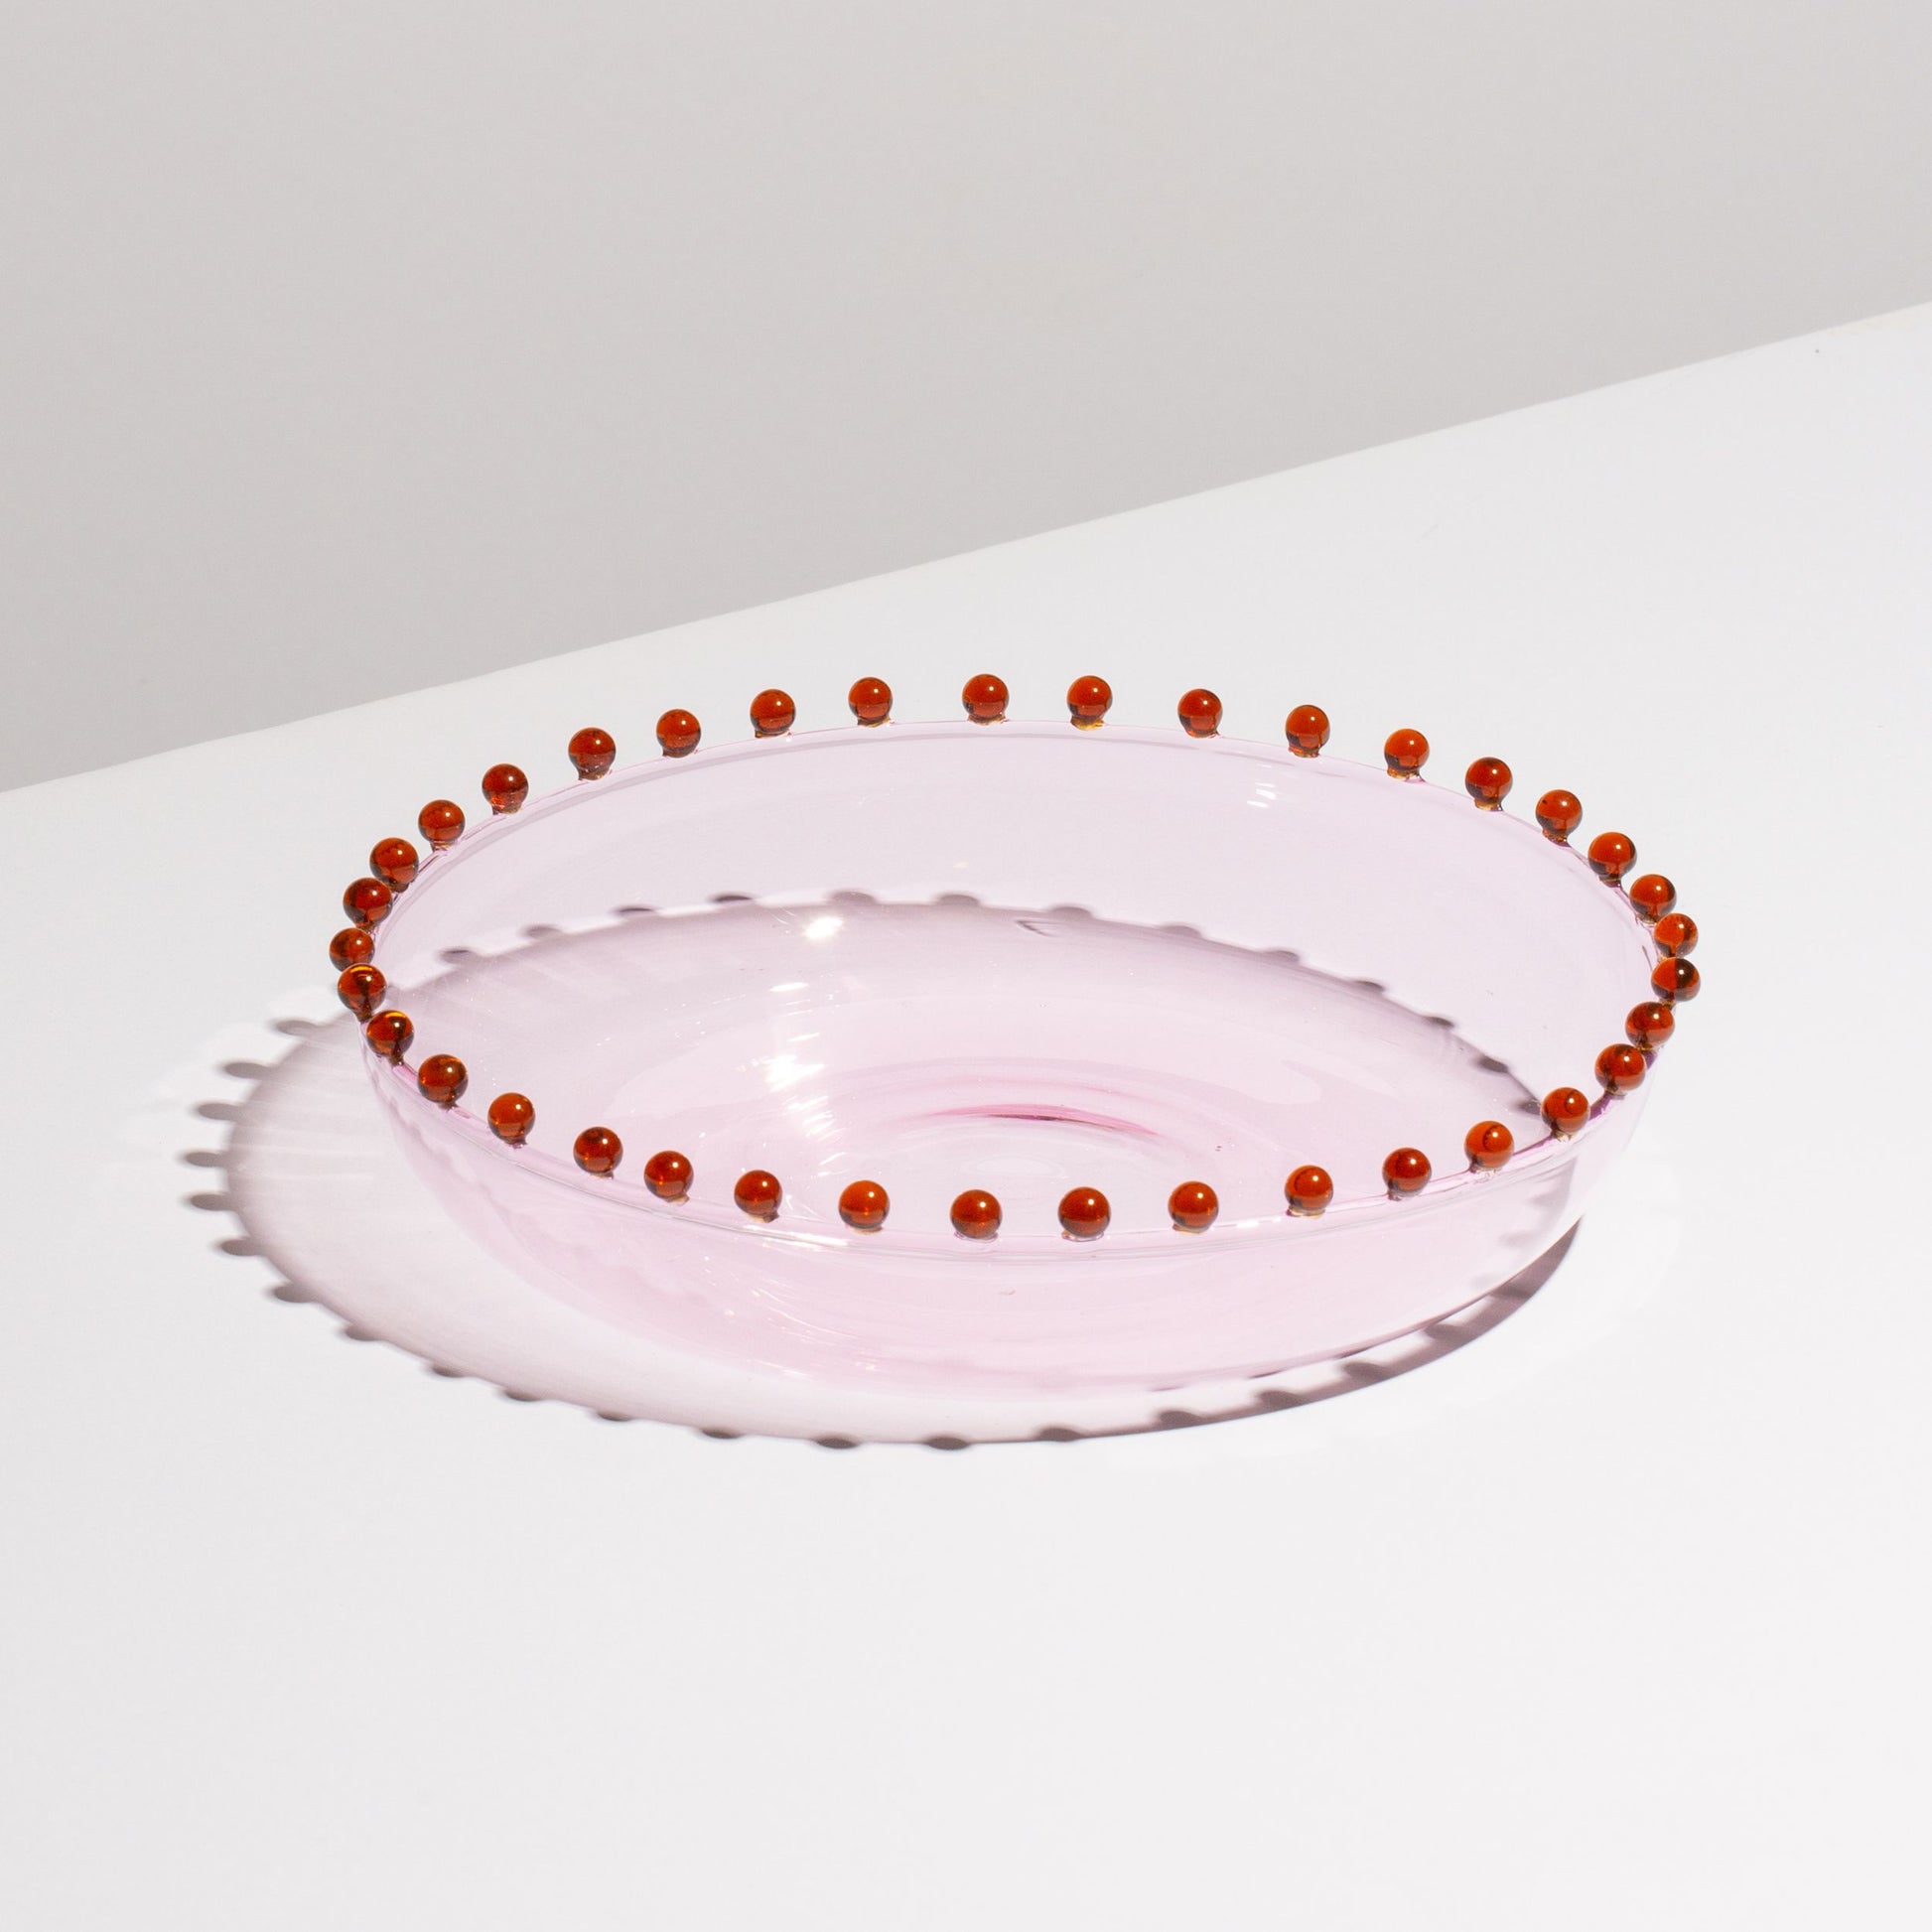 The shape lends itself beautifully to sharing all sweet or savoury dishes. Use the Pearl Platter for healthy summer salads, grilled shellfish with lemon, or apple crumble. This delicate piece is made for grown-ups and the fanciest of soirees.